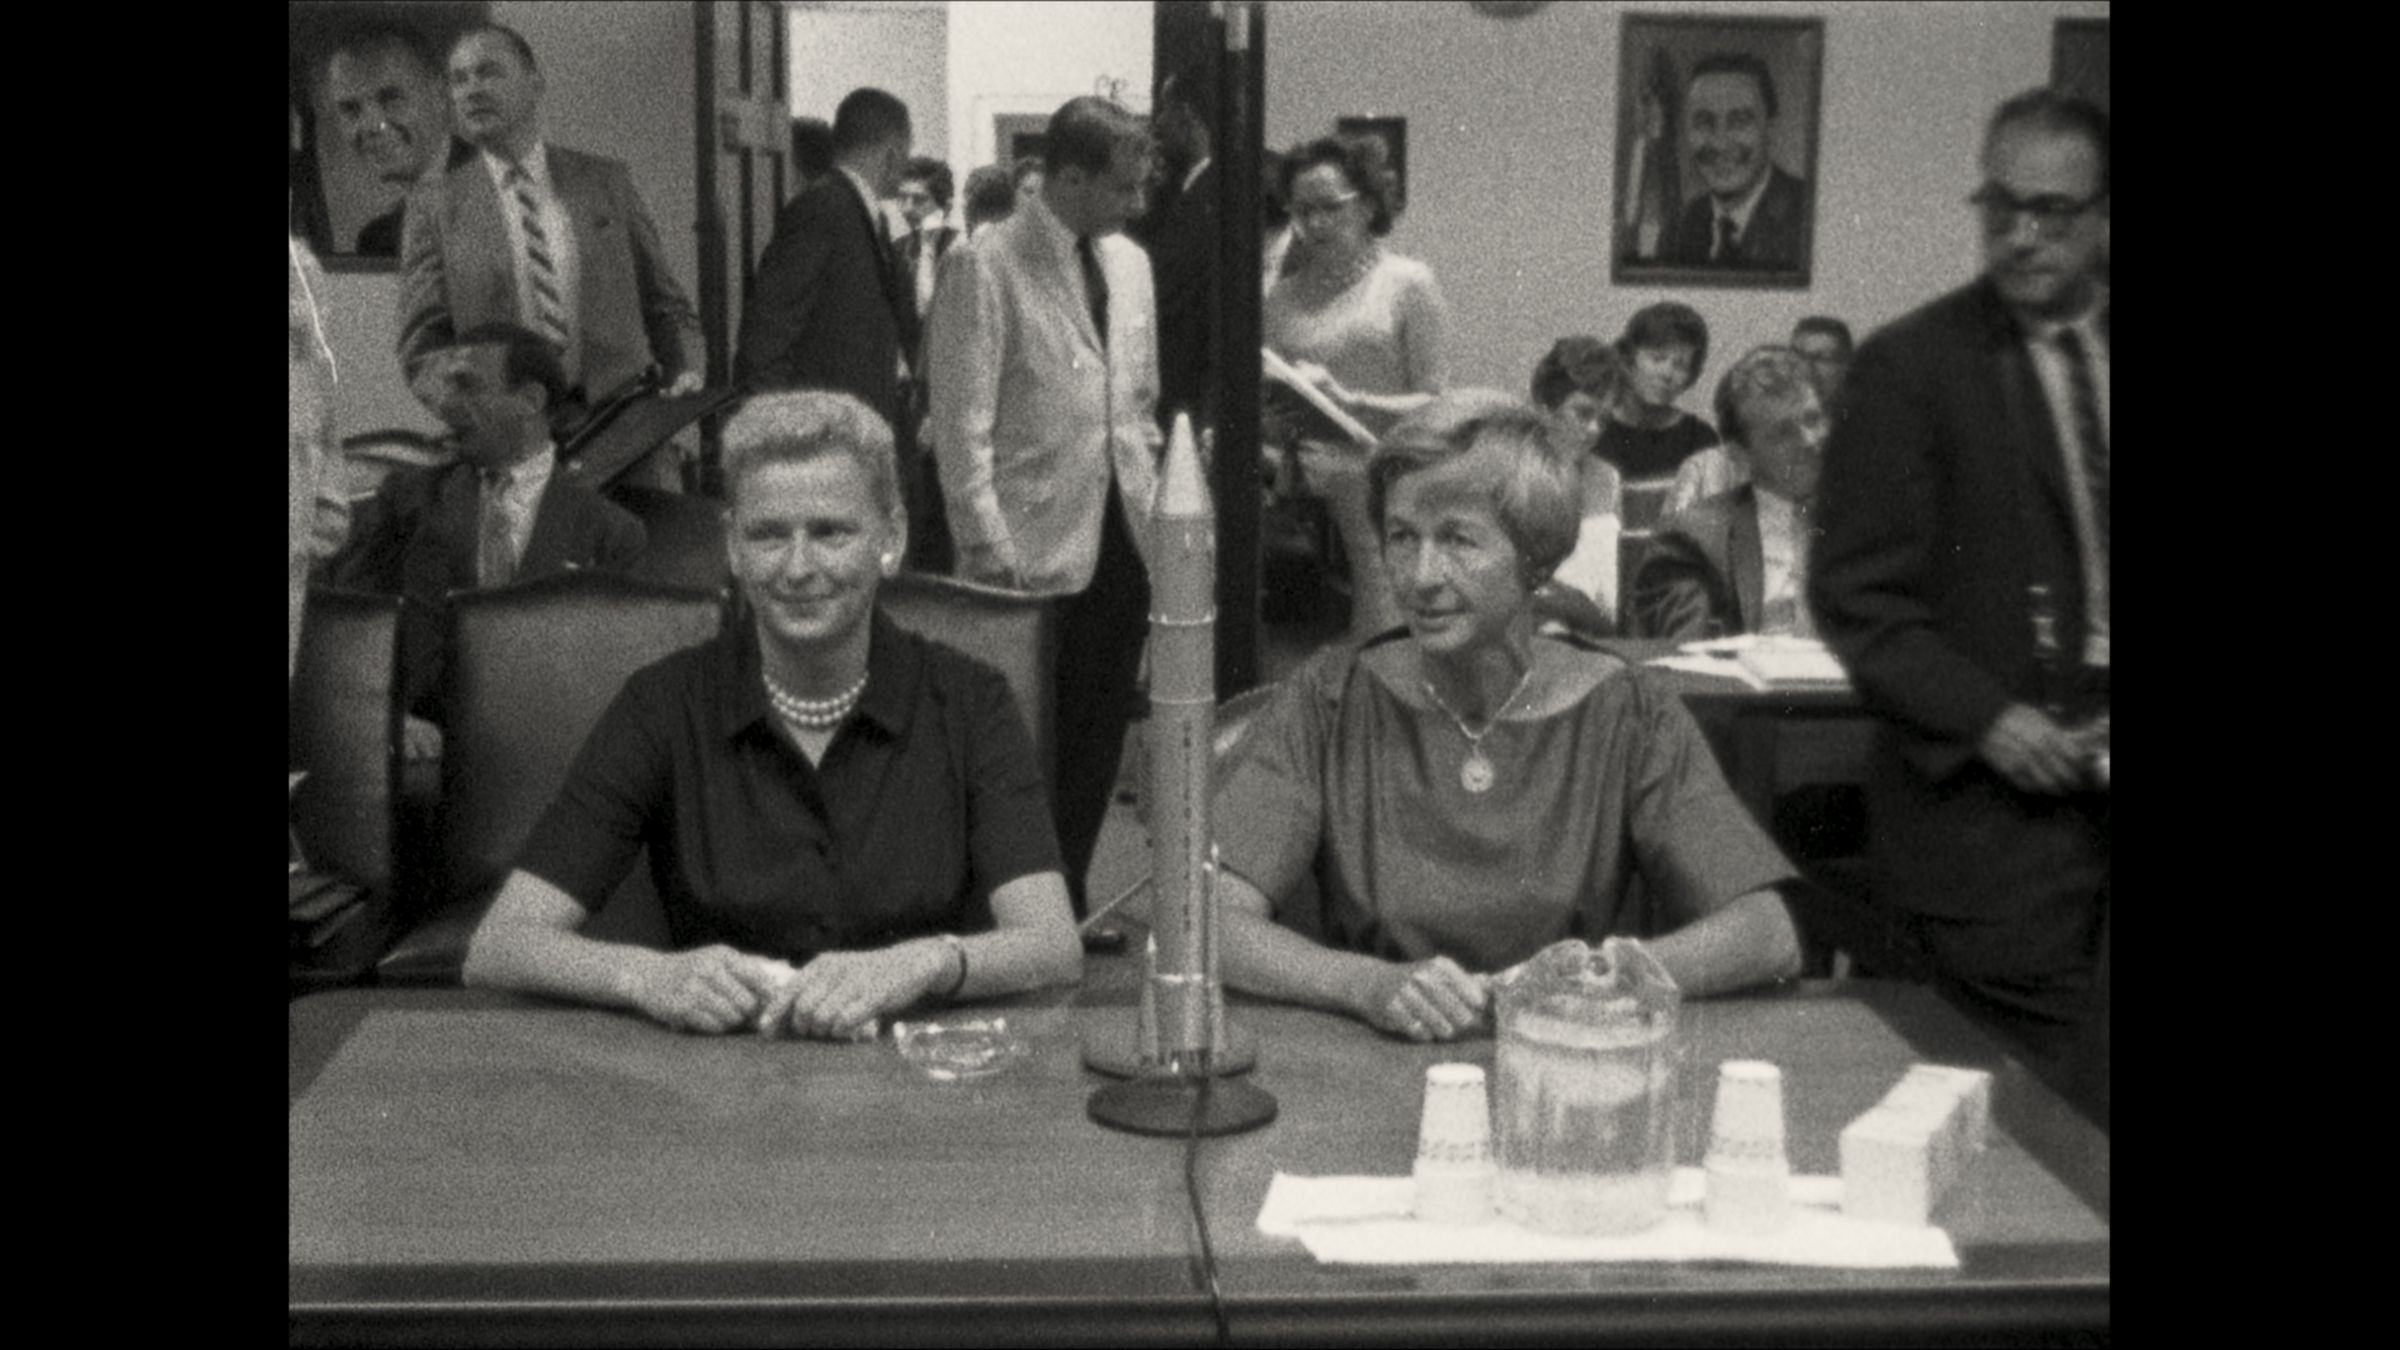 Women astronaut trainees Jerrie Cobb and Janey Hart testify before Congress in 1962.